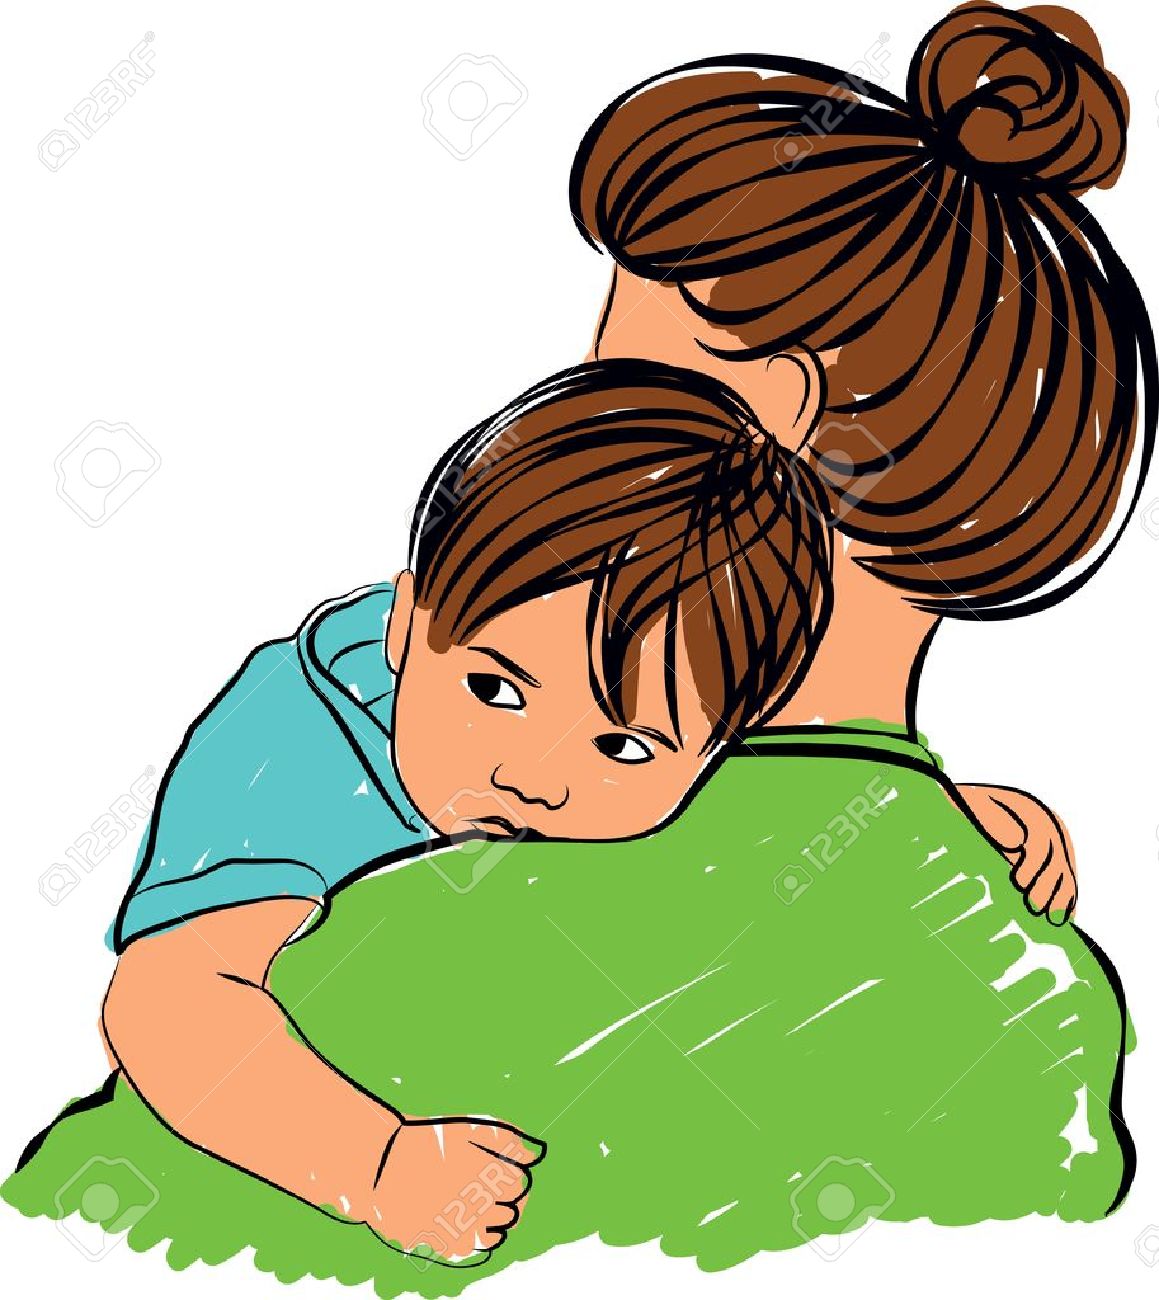 family hugging clipart - photo #39